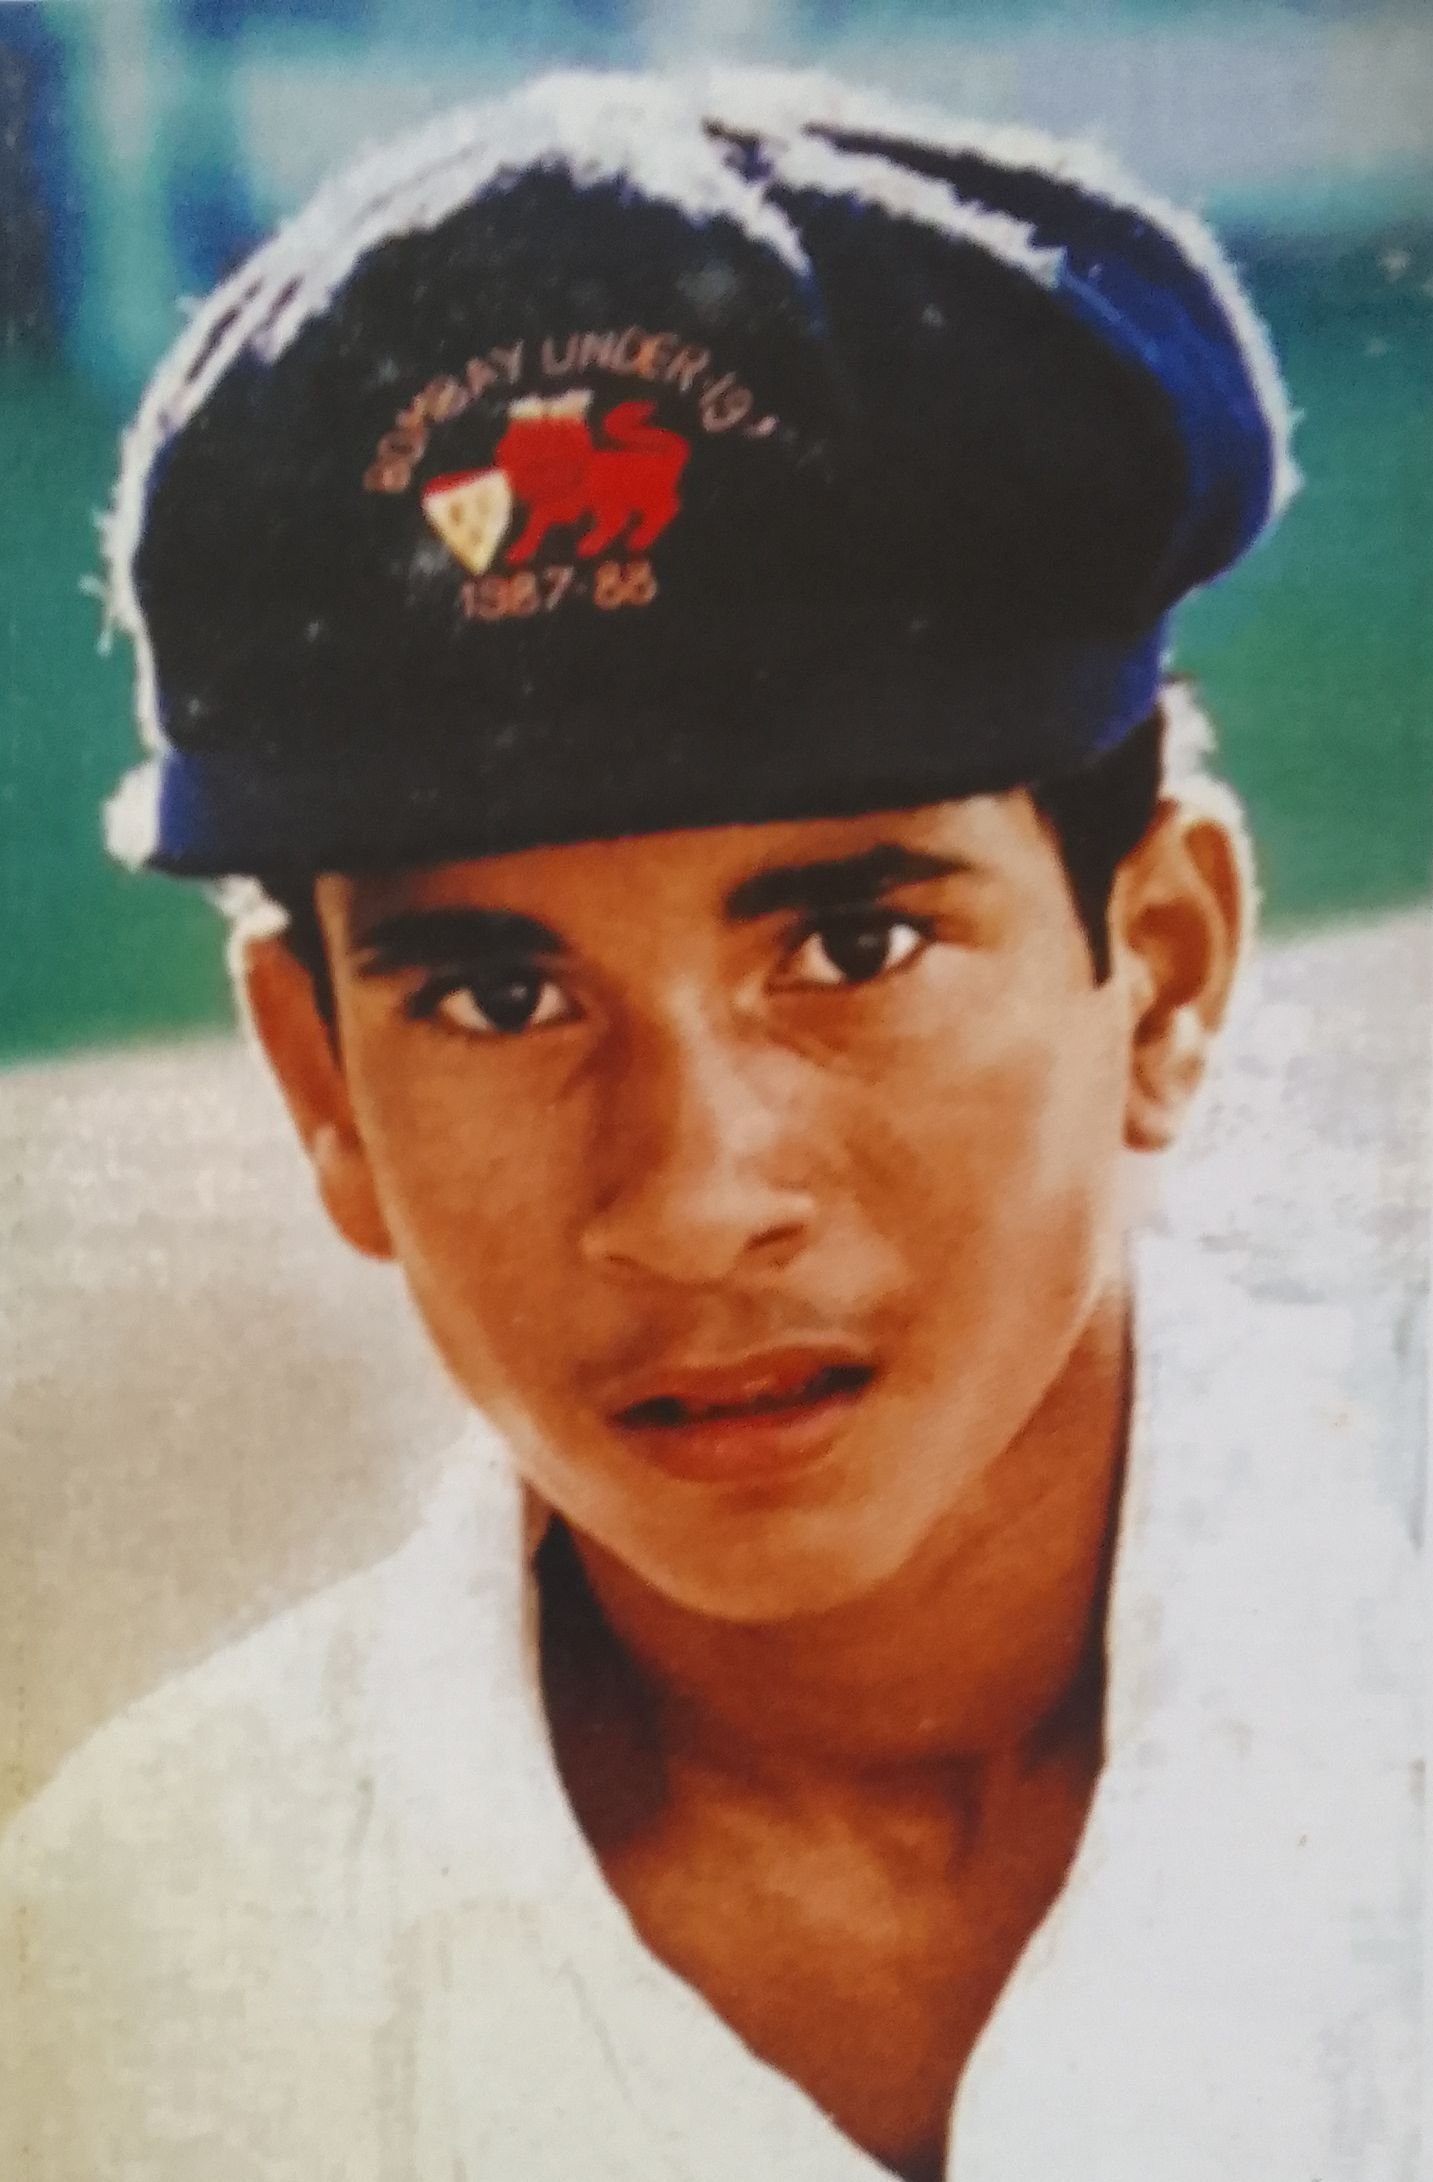 When Sachin Tendulkar was inducted among the reserves of the Bombay team last year, many cricket experts felt that he was being rushed into big cricket.